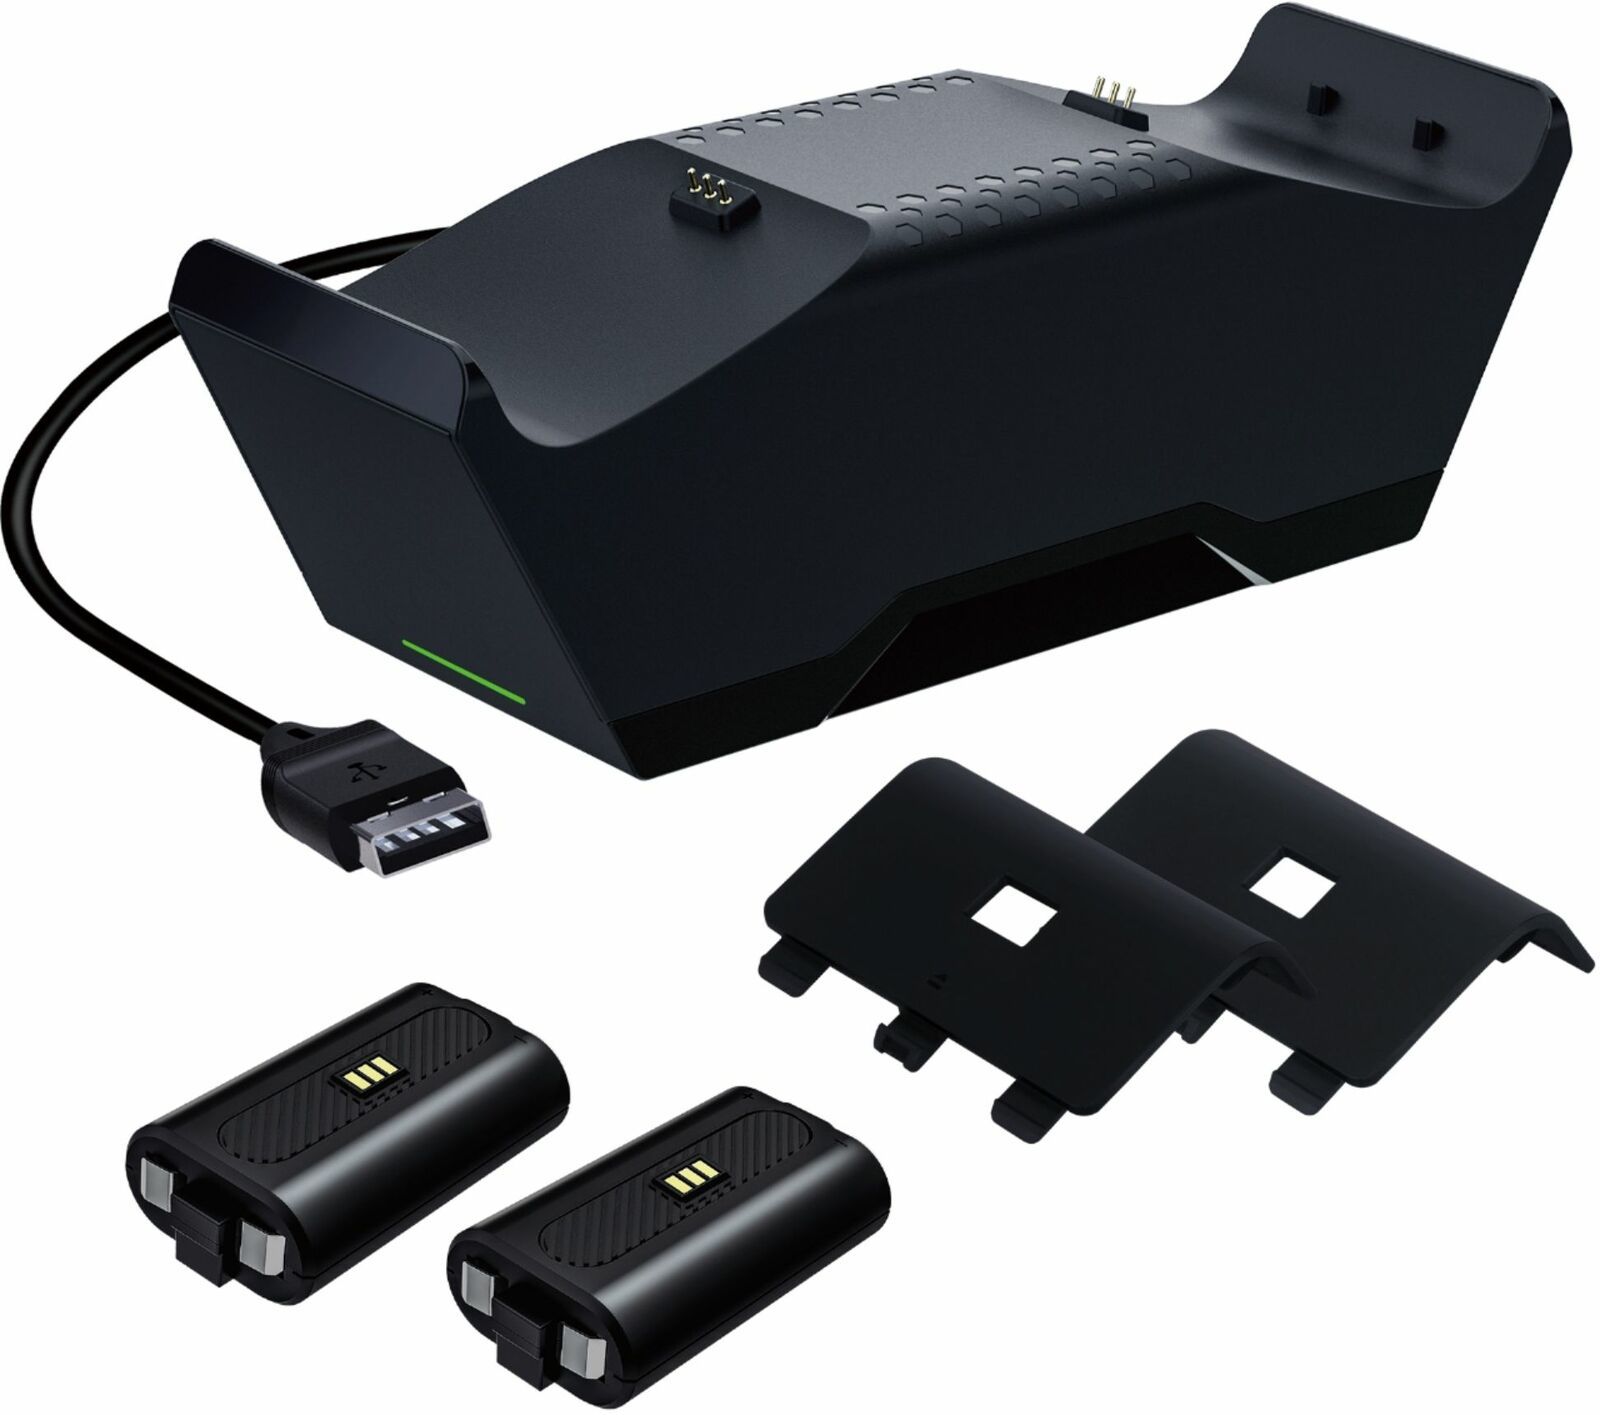 Primary image for Insignia- Dual Controller Charging System for Xbox Series X|S - Black